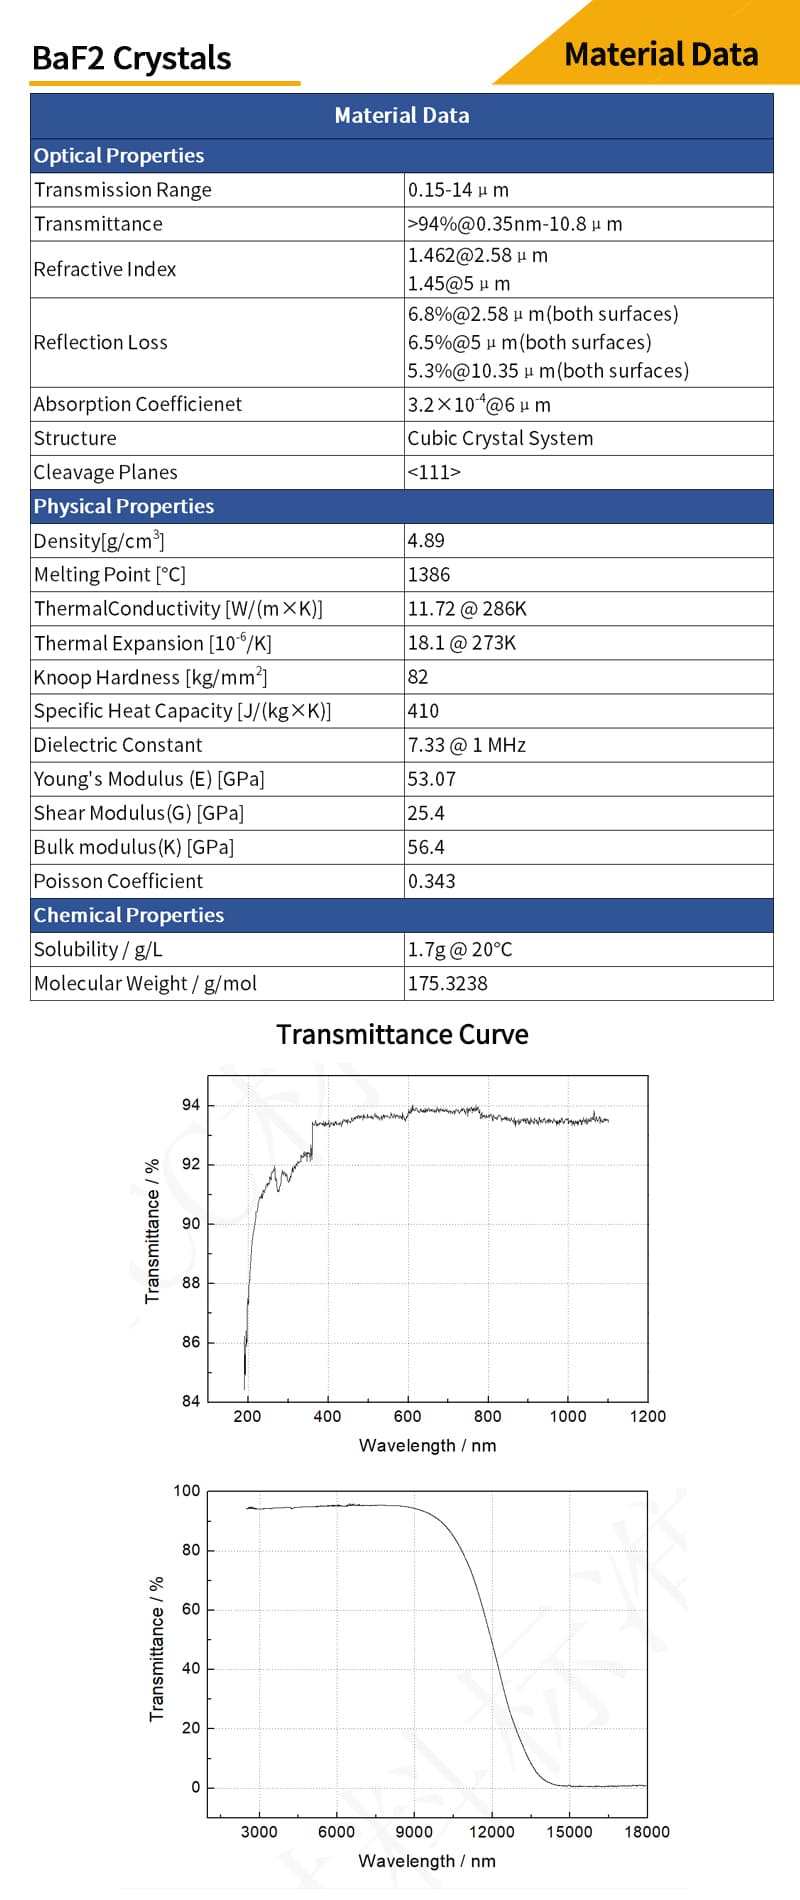 Material data and transmittance curves for barium fluoride round windows